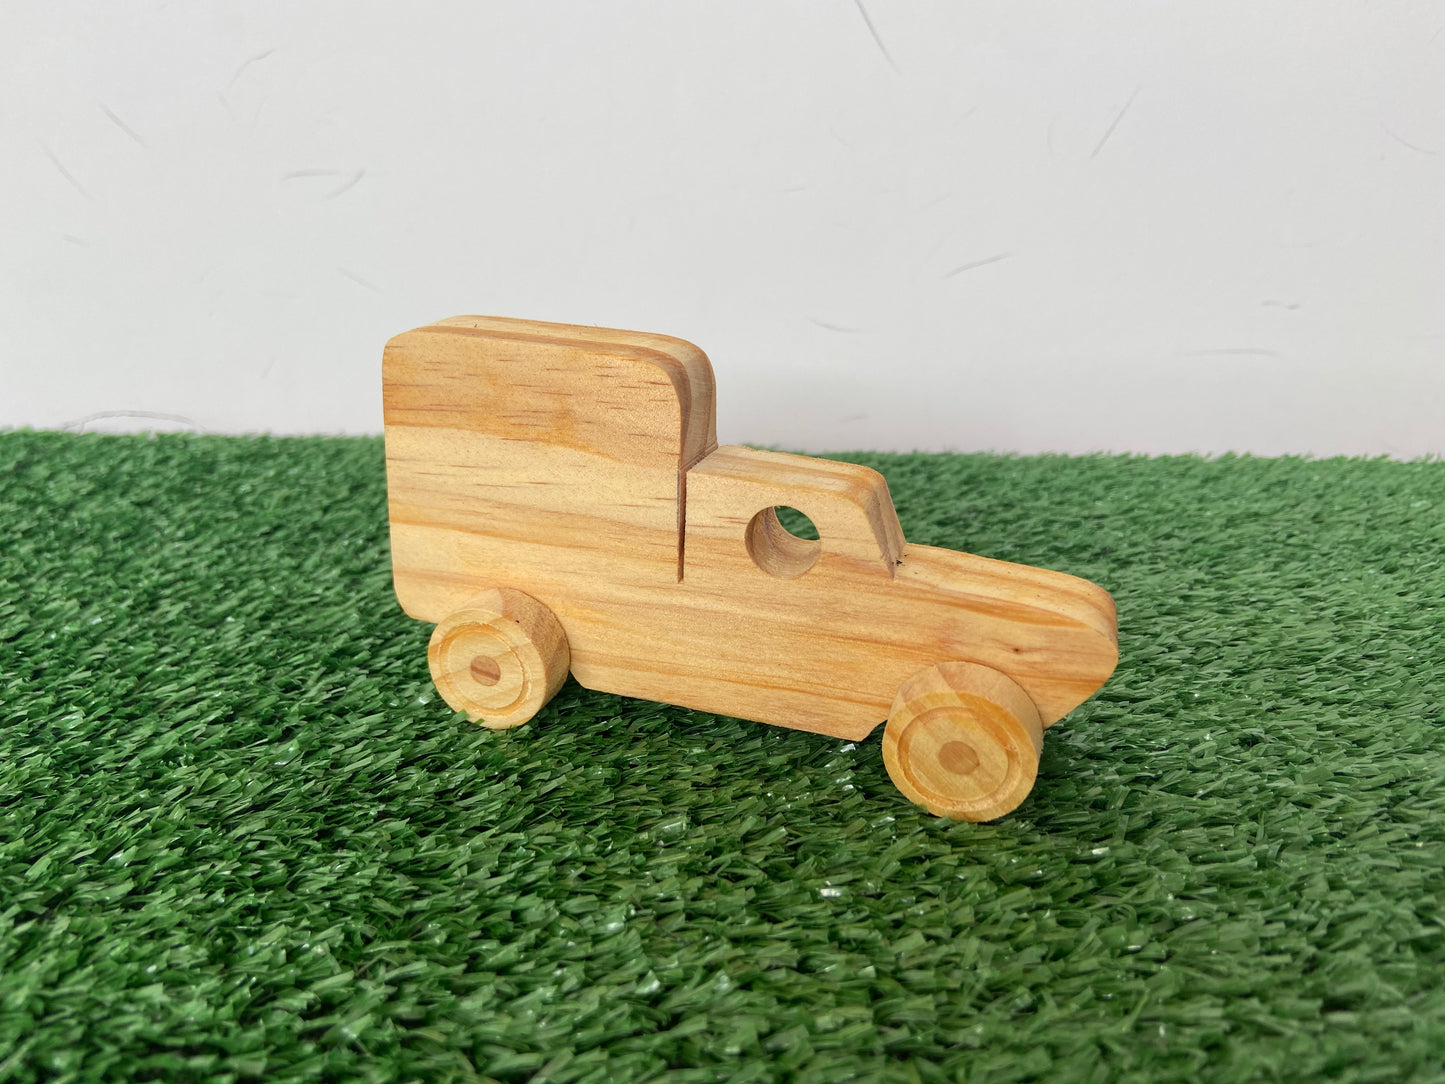 Wooden Toy - Small Delivery Truck